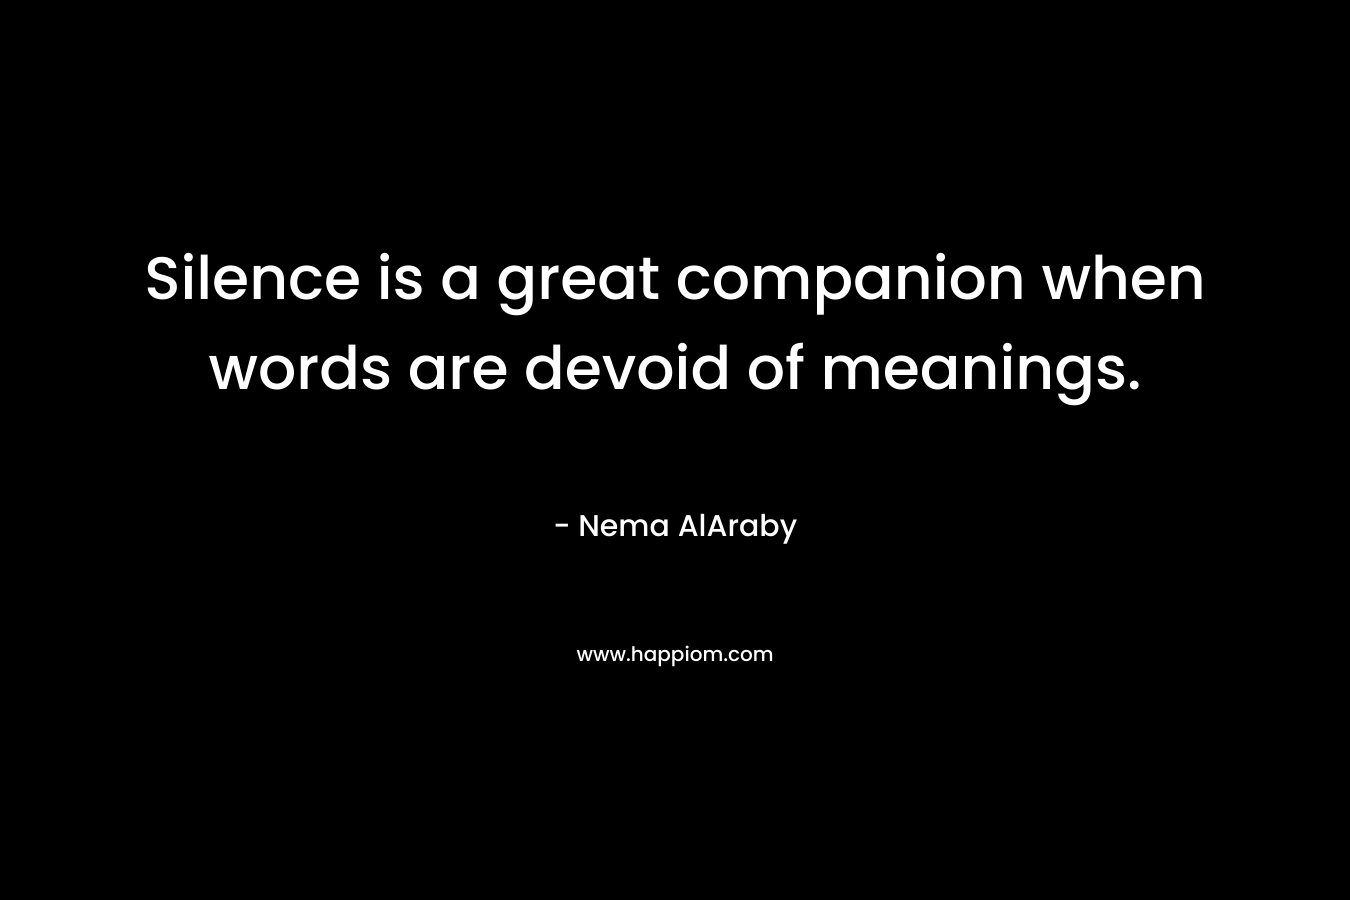 Silence is a great companion when words are devoid of meanings. – Nema AlAraby